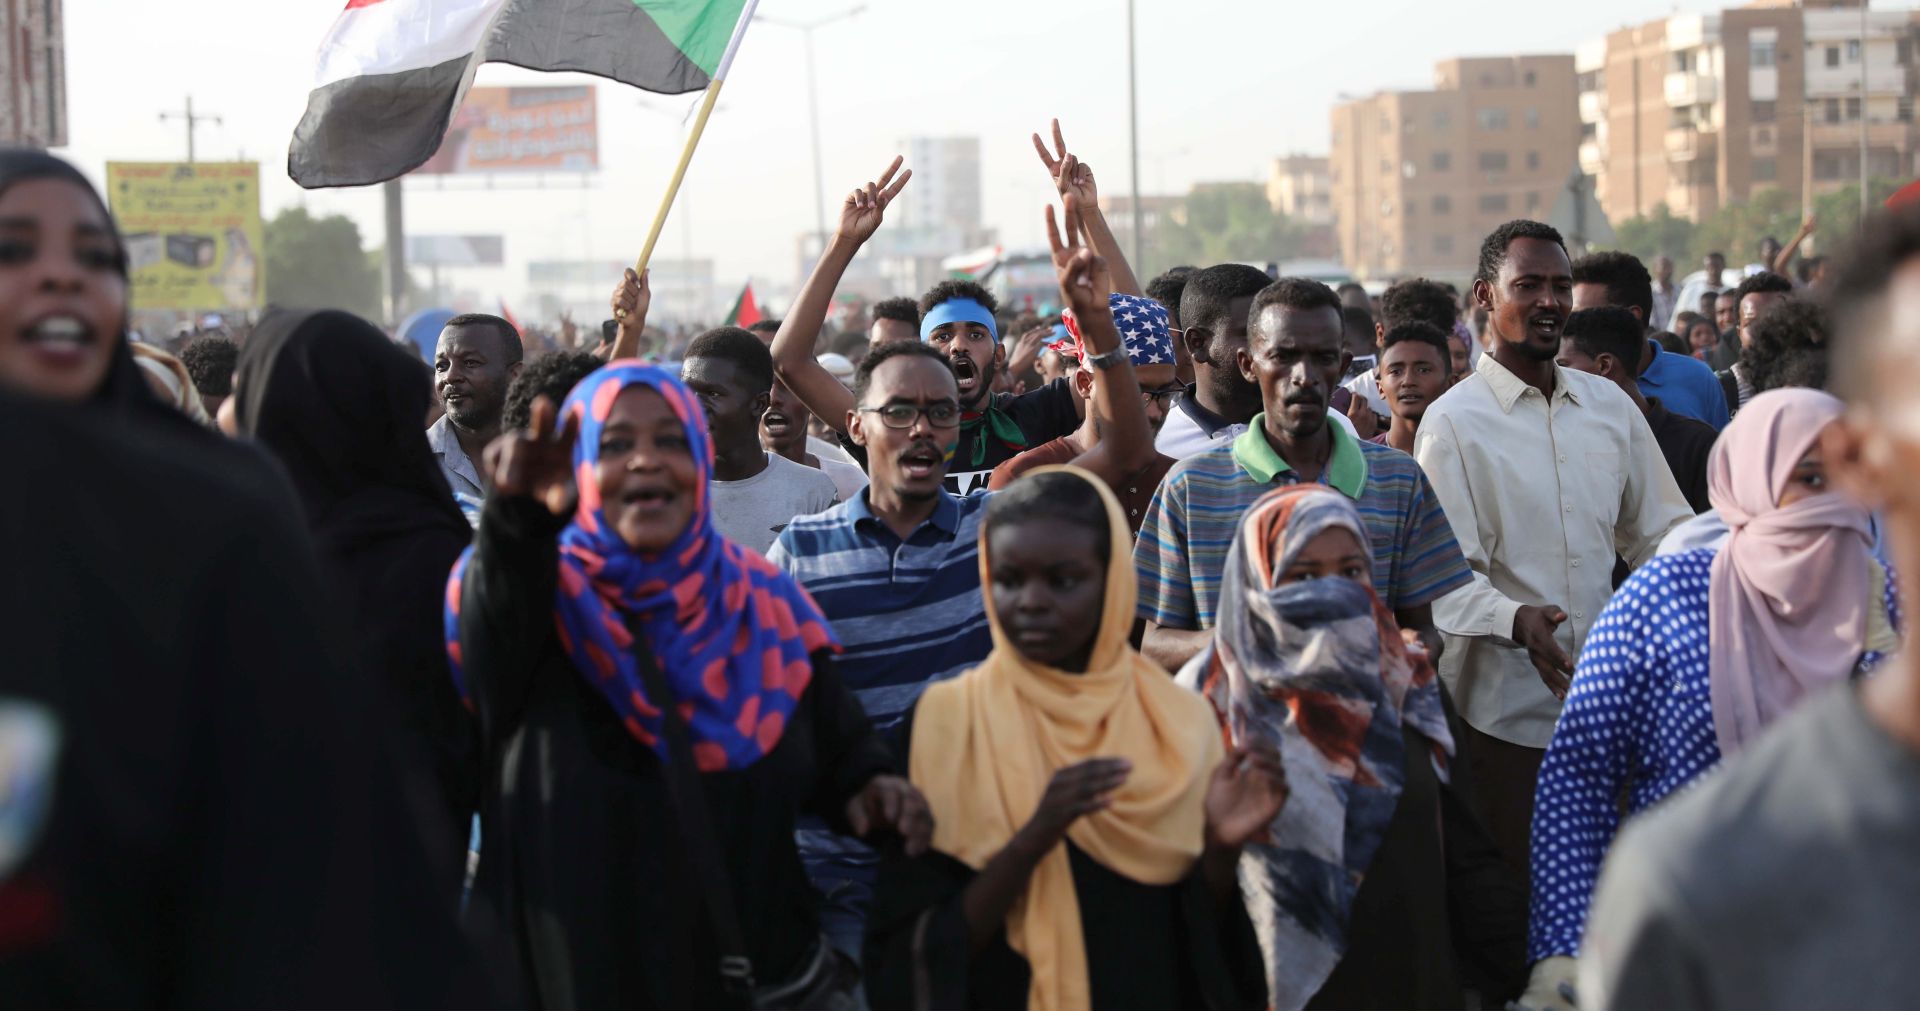 epa07715027 Sudanese people march to mark the 40th Day after death of protesters killed during the sit-in outside army headquarters in Khartoum, Sudan, 13 July 2019. Scores of protesters were killed in a raid on the sit-in camp outside the army headquarters in Khartoum on 03 June. Hundreds of protesters marched on 13 July calling for justice and fair investigation in the killings that left a number of victims ranging between 128 people according to civil groups and 61 according to official figures.  EPA/MARWAN ALI